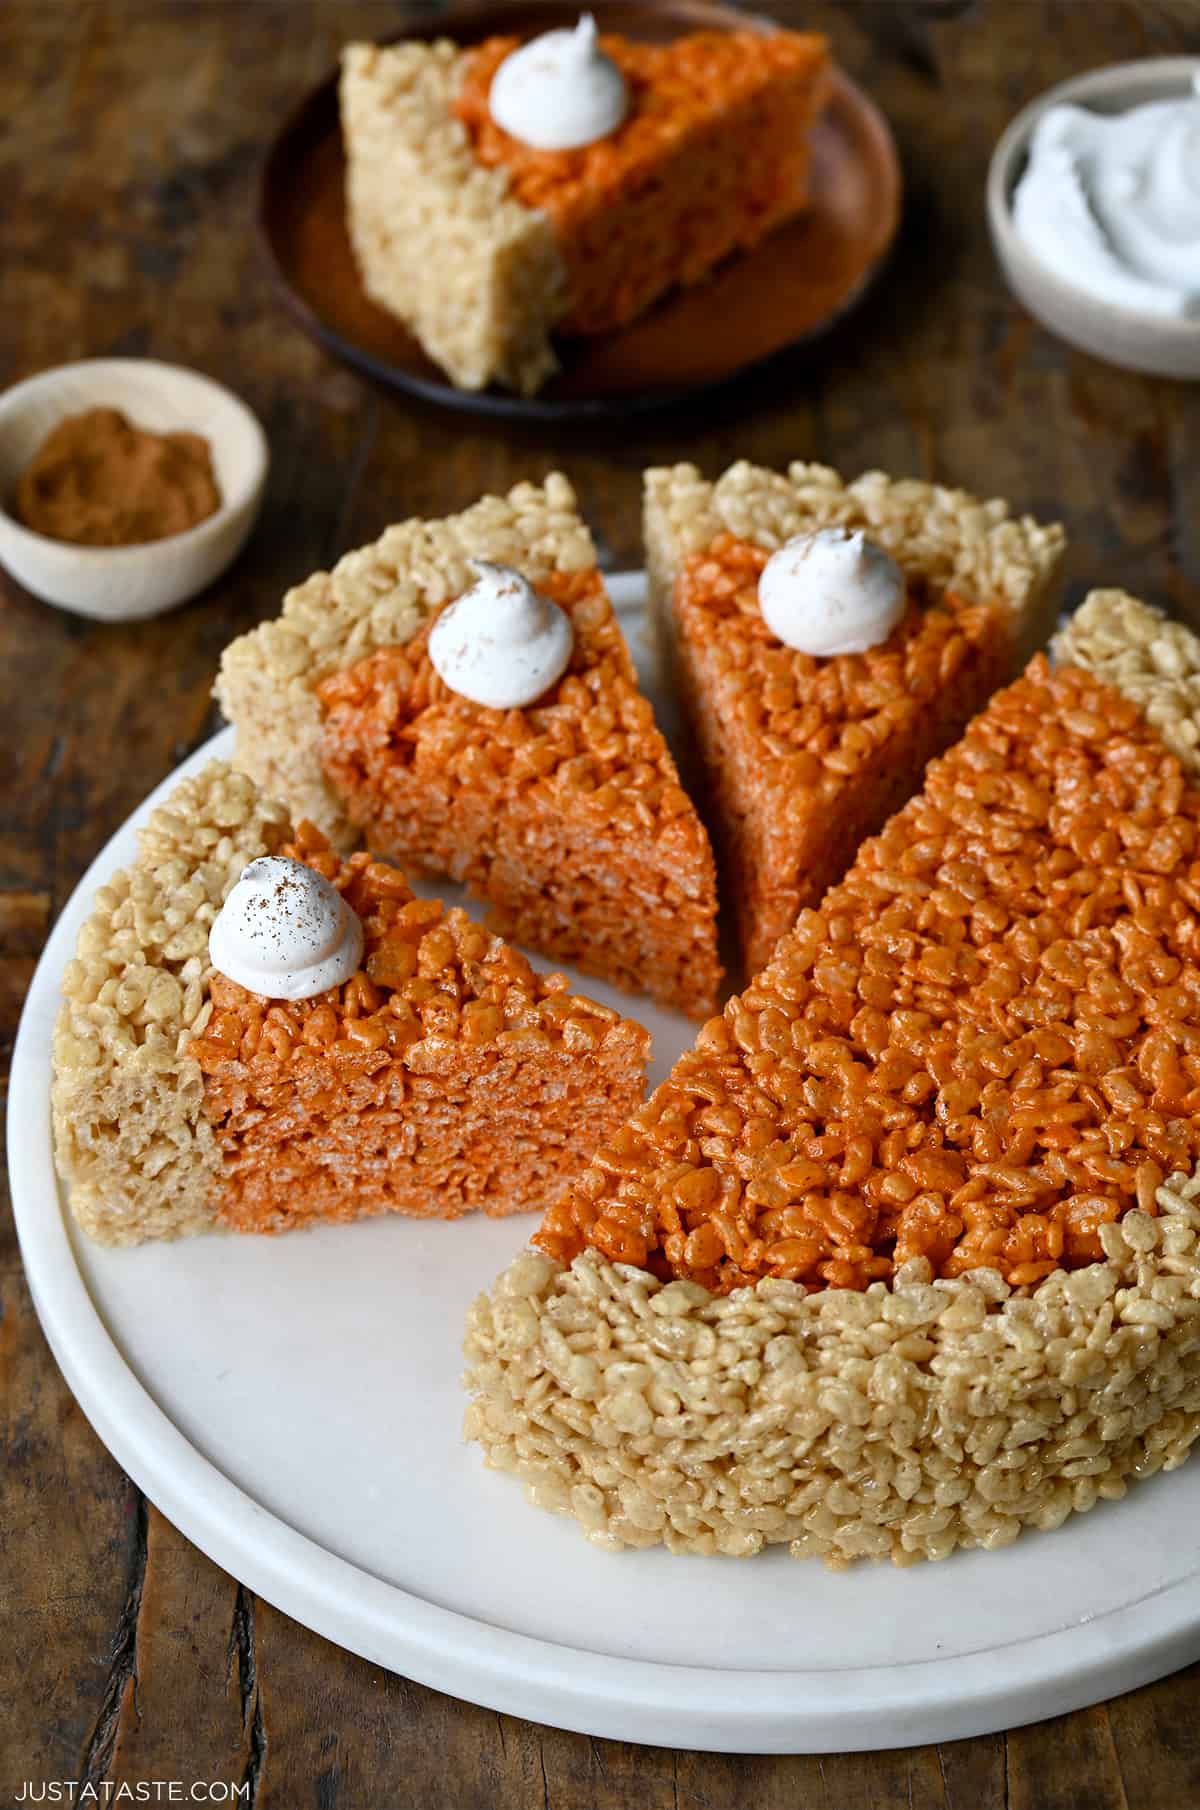 Pumpkin-flavored Rice Krispies treats cut into pie wedges and topped with dollops of whipped cream on a round serving platter next to a small bowl containing pumpkin pie spice.